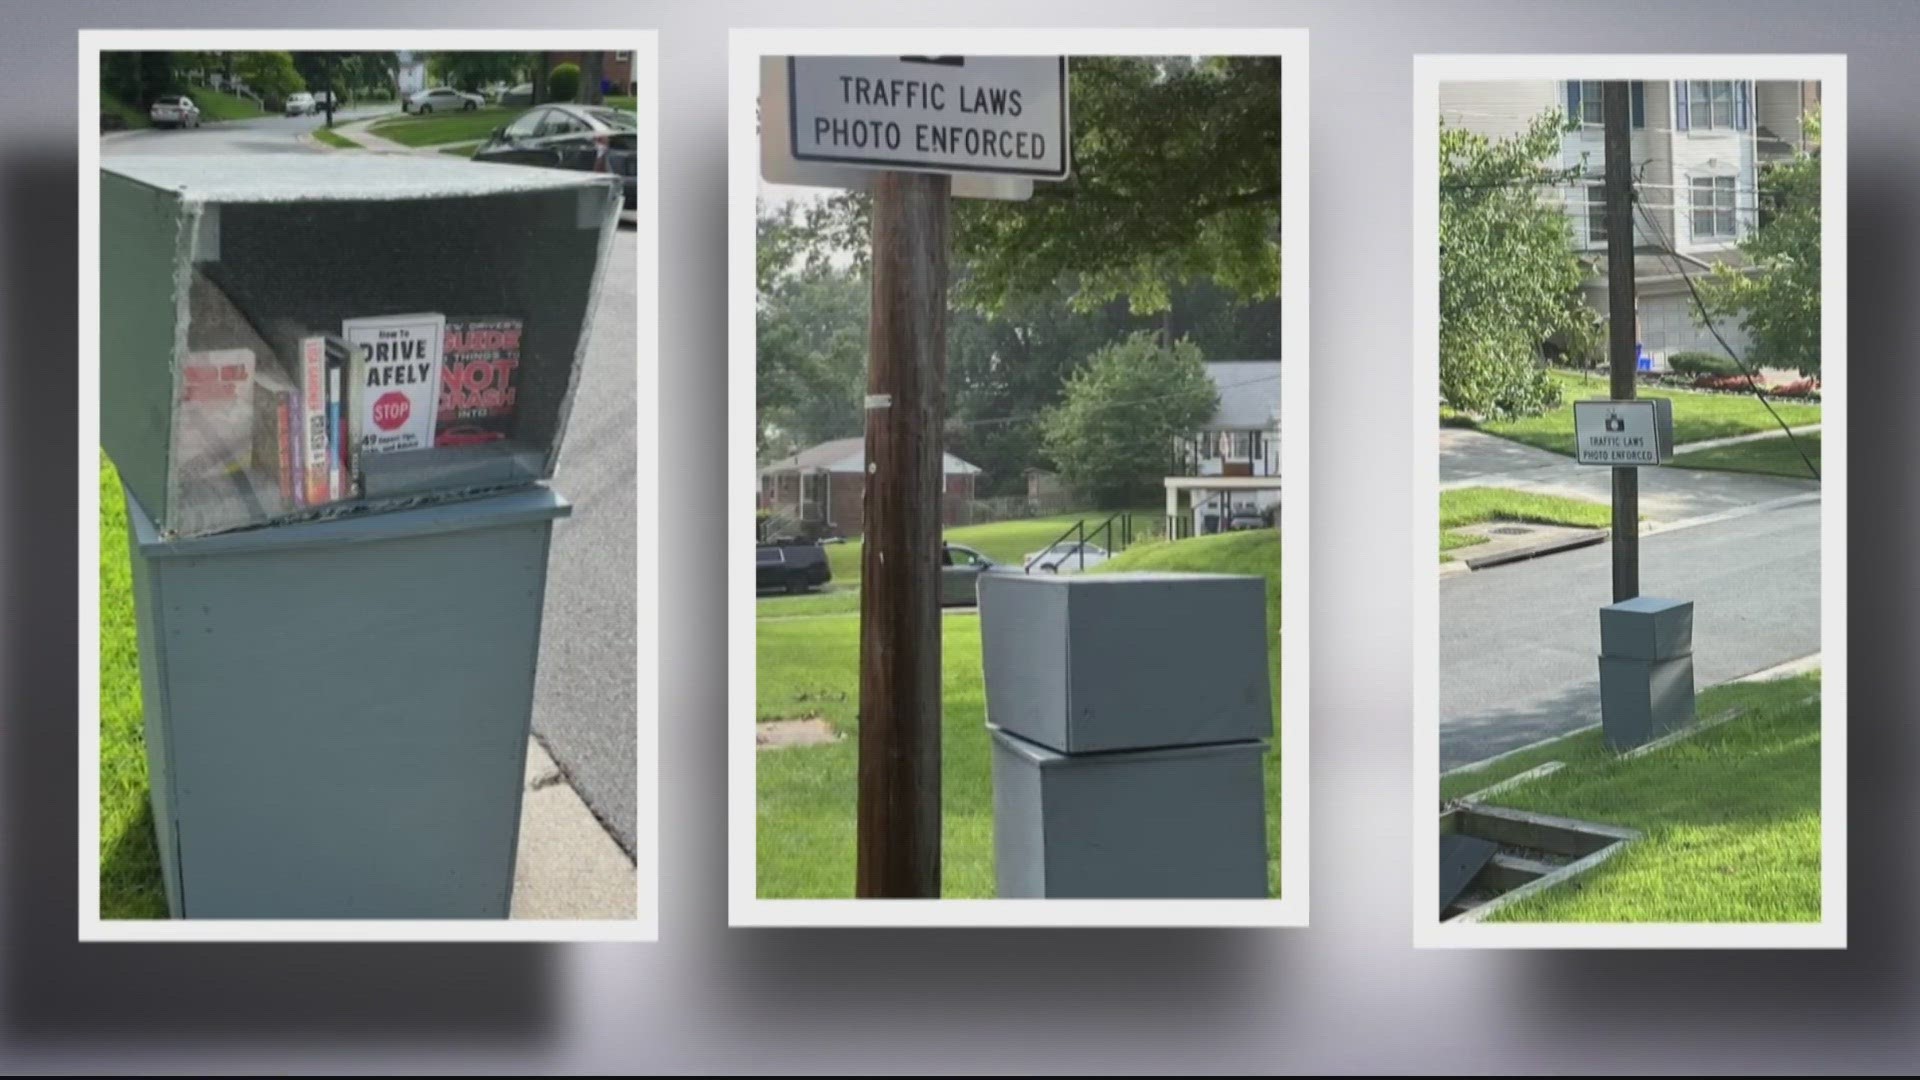 Someone built a little library that looks a lot like a speed camera. And drivers seemed to notice.